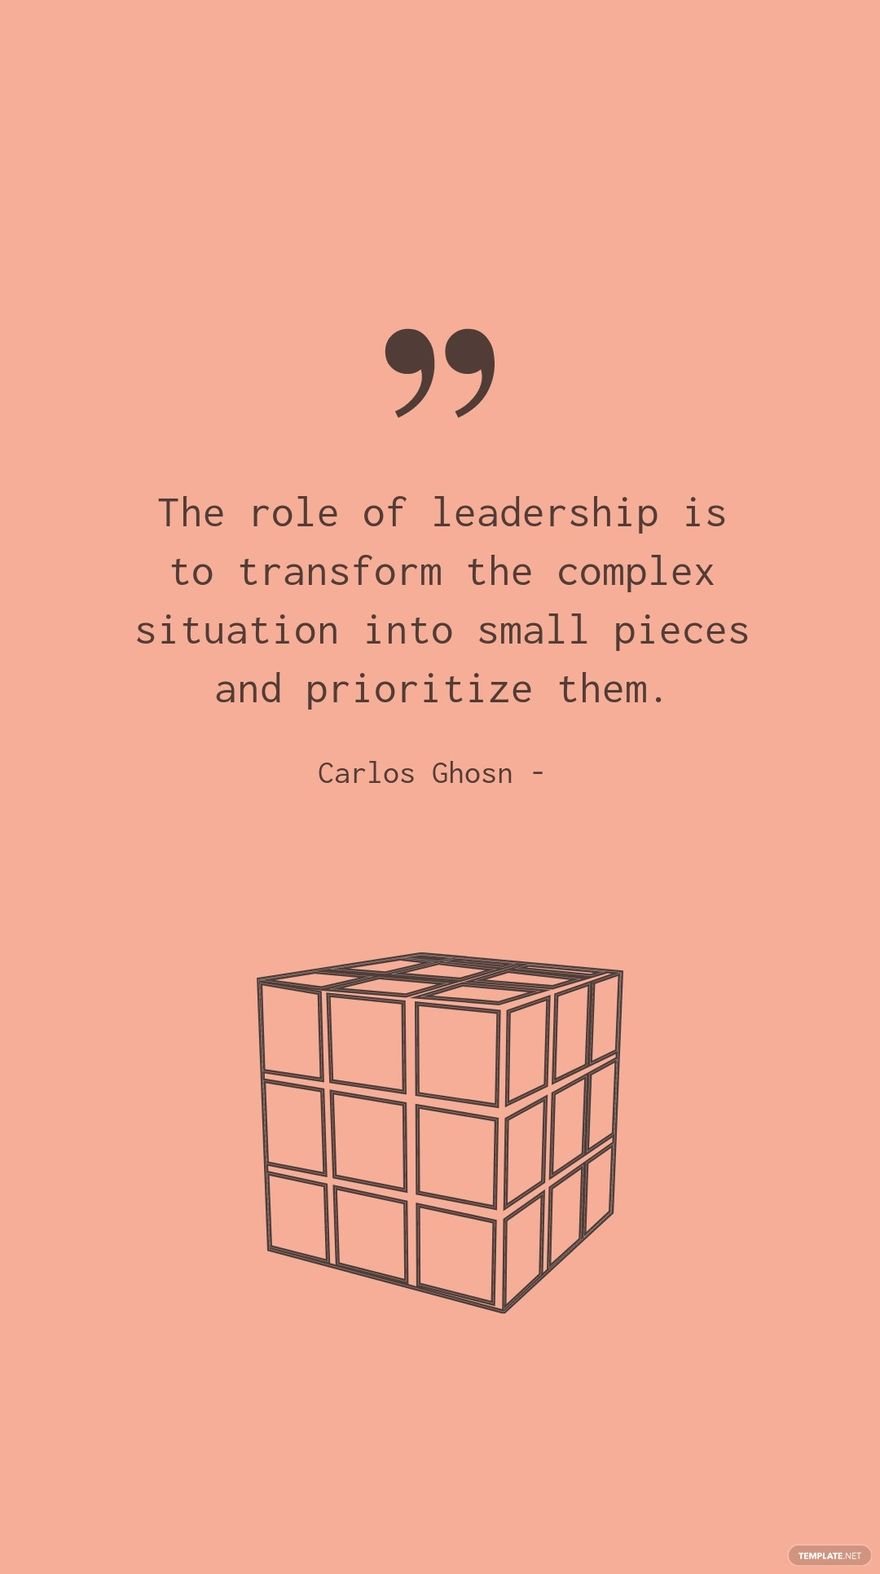 Free Carlos Ghosn - The role of leadership is to transform the complex situation into small pieces and prioritize them. in JPG